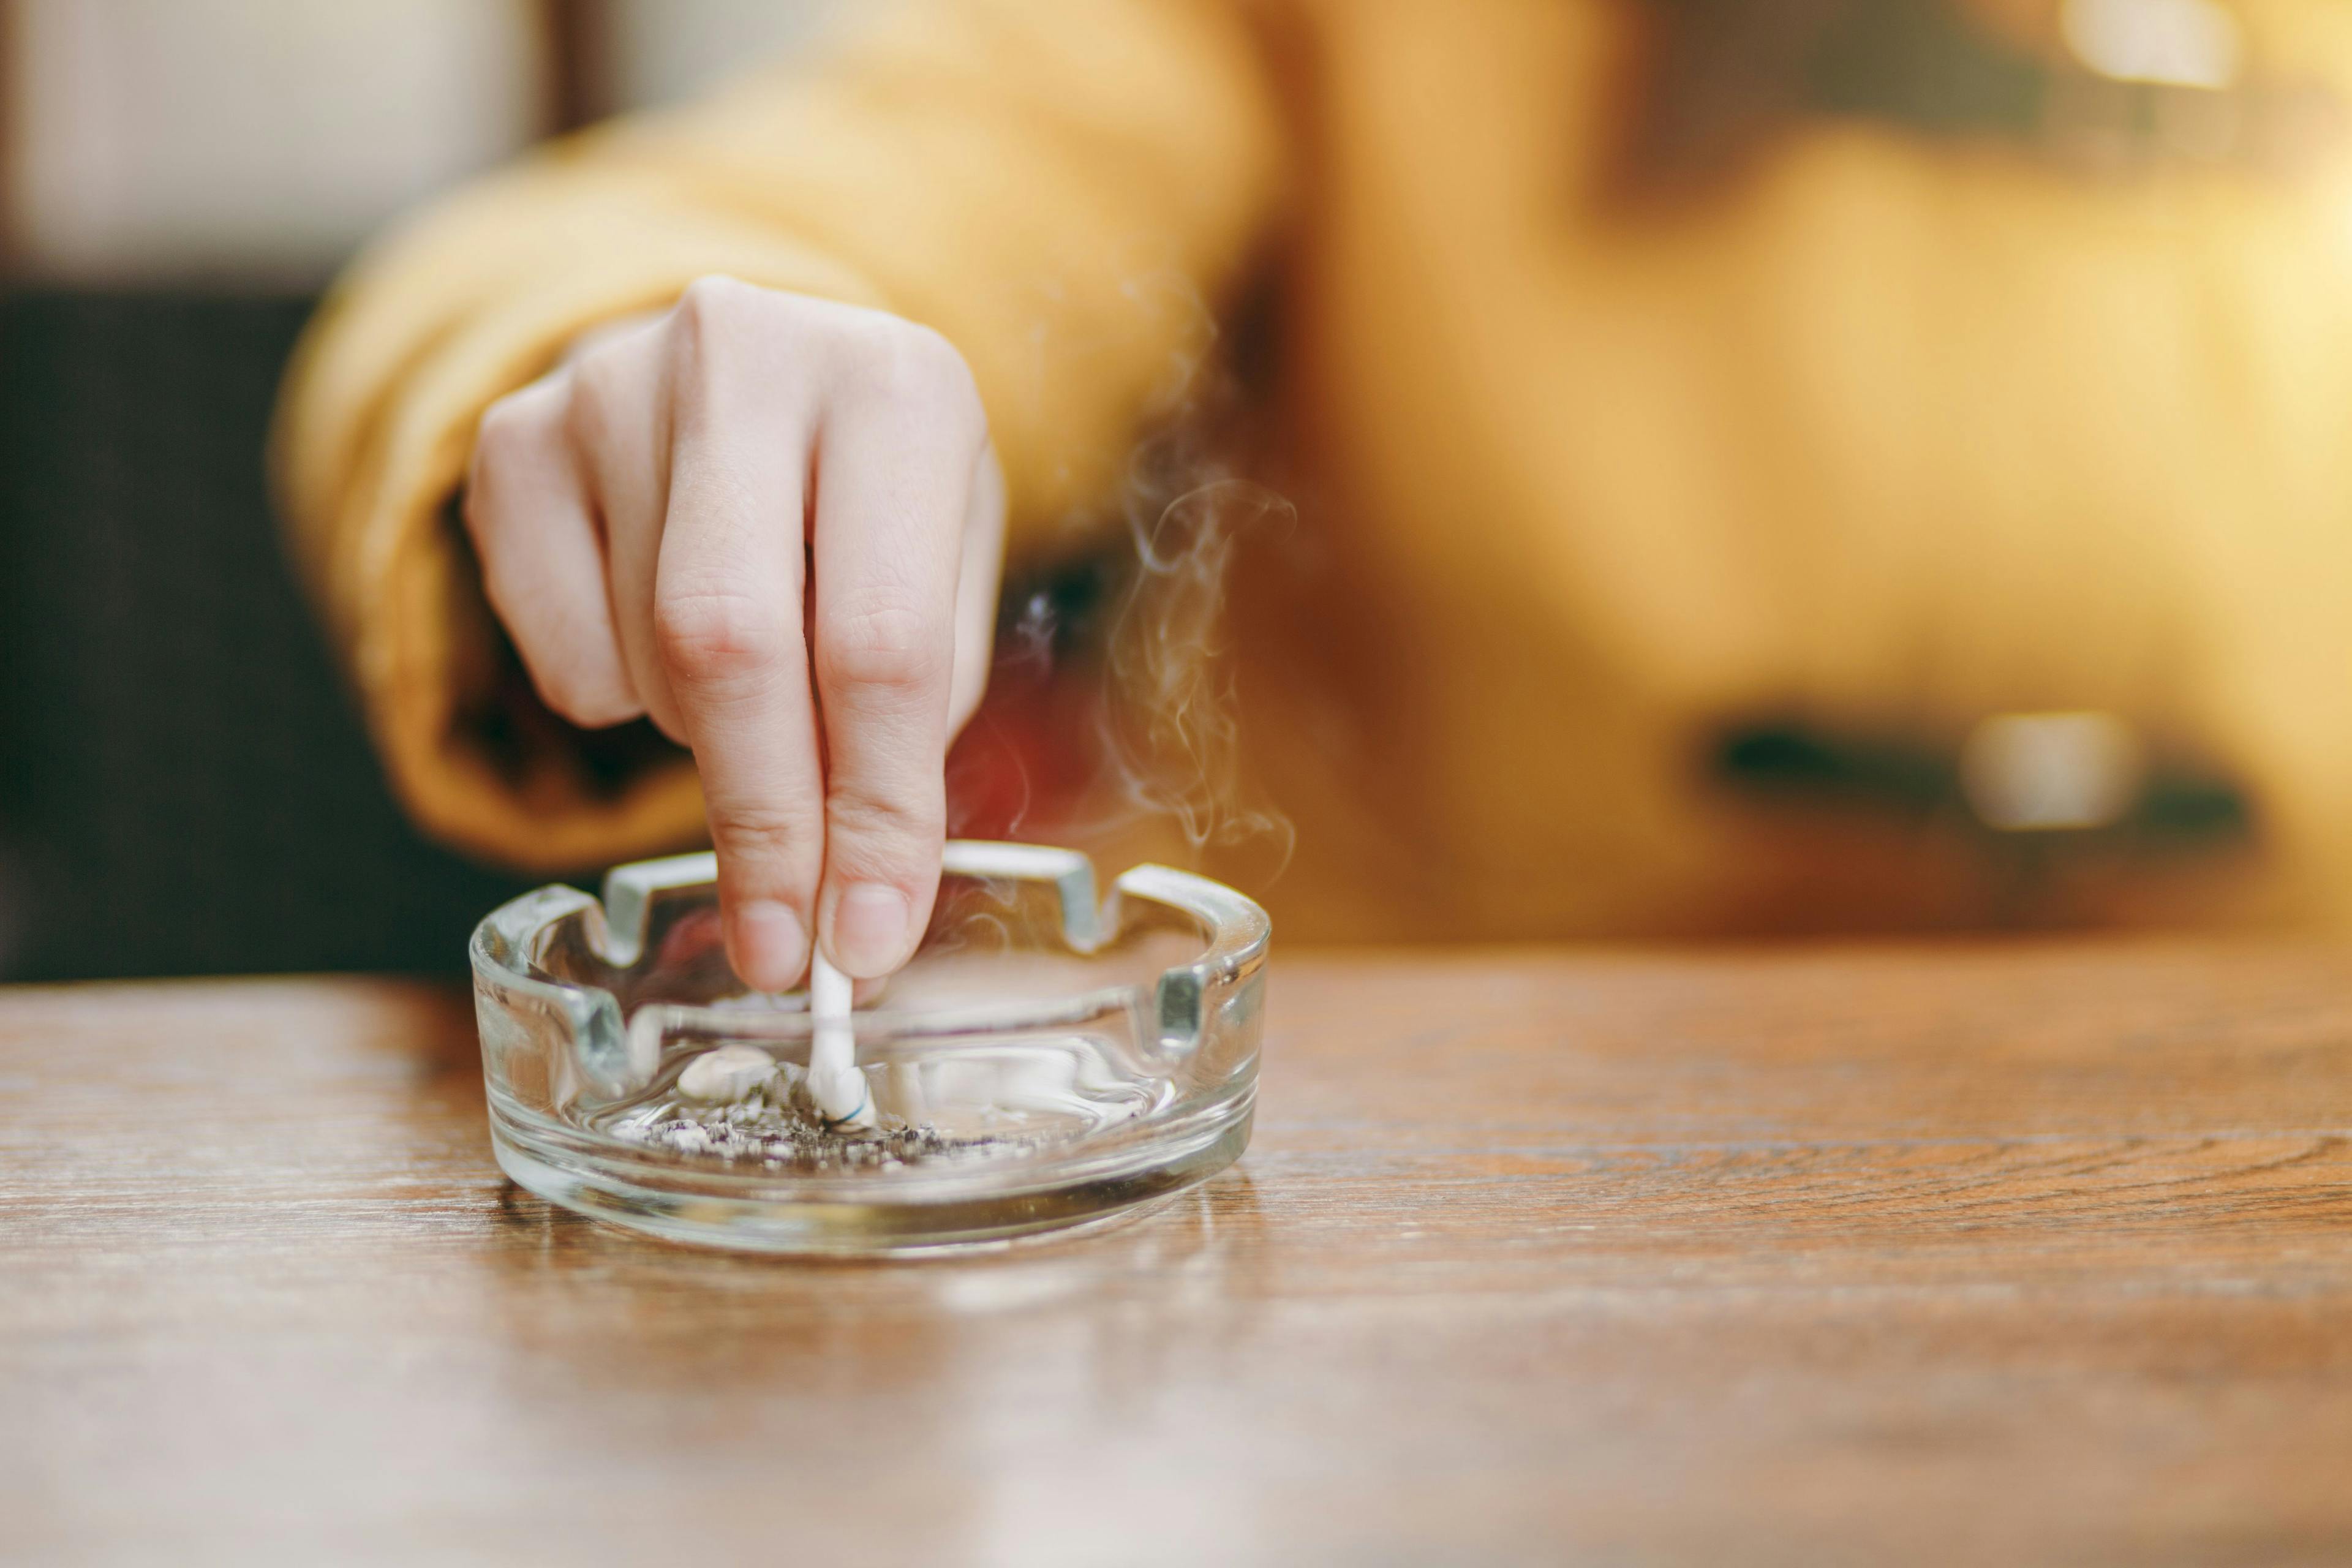 Focus on caucasian young woman hand putting out cigarette on glass ashtray on wooden table, cigarette butt, smoking is dying. Quit smoking. Health concept. Close up photo. | Image credit: ViDi Studio - © - stock.adobe.com 